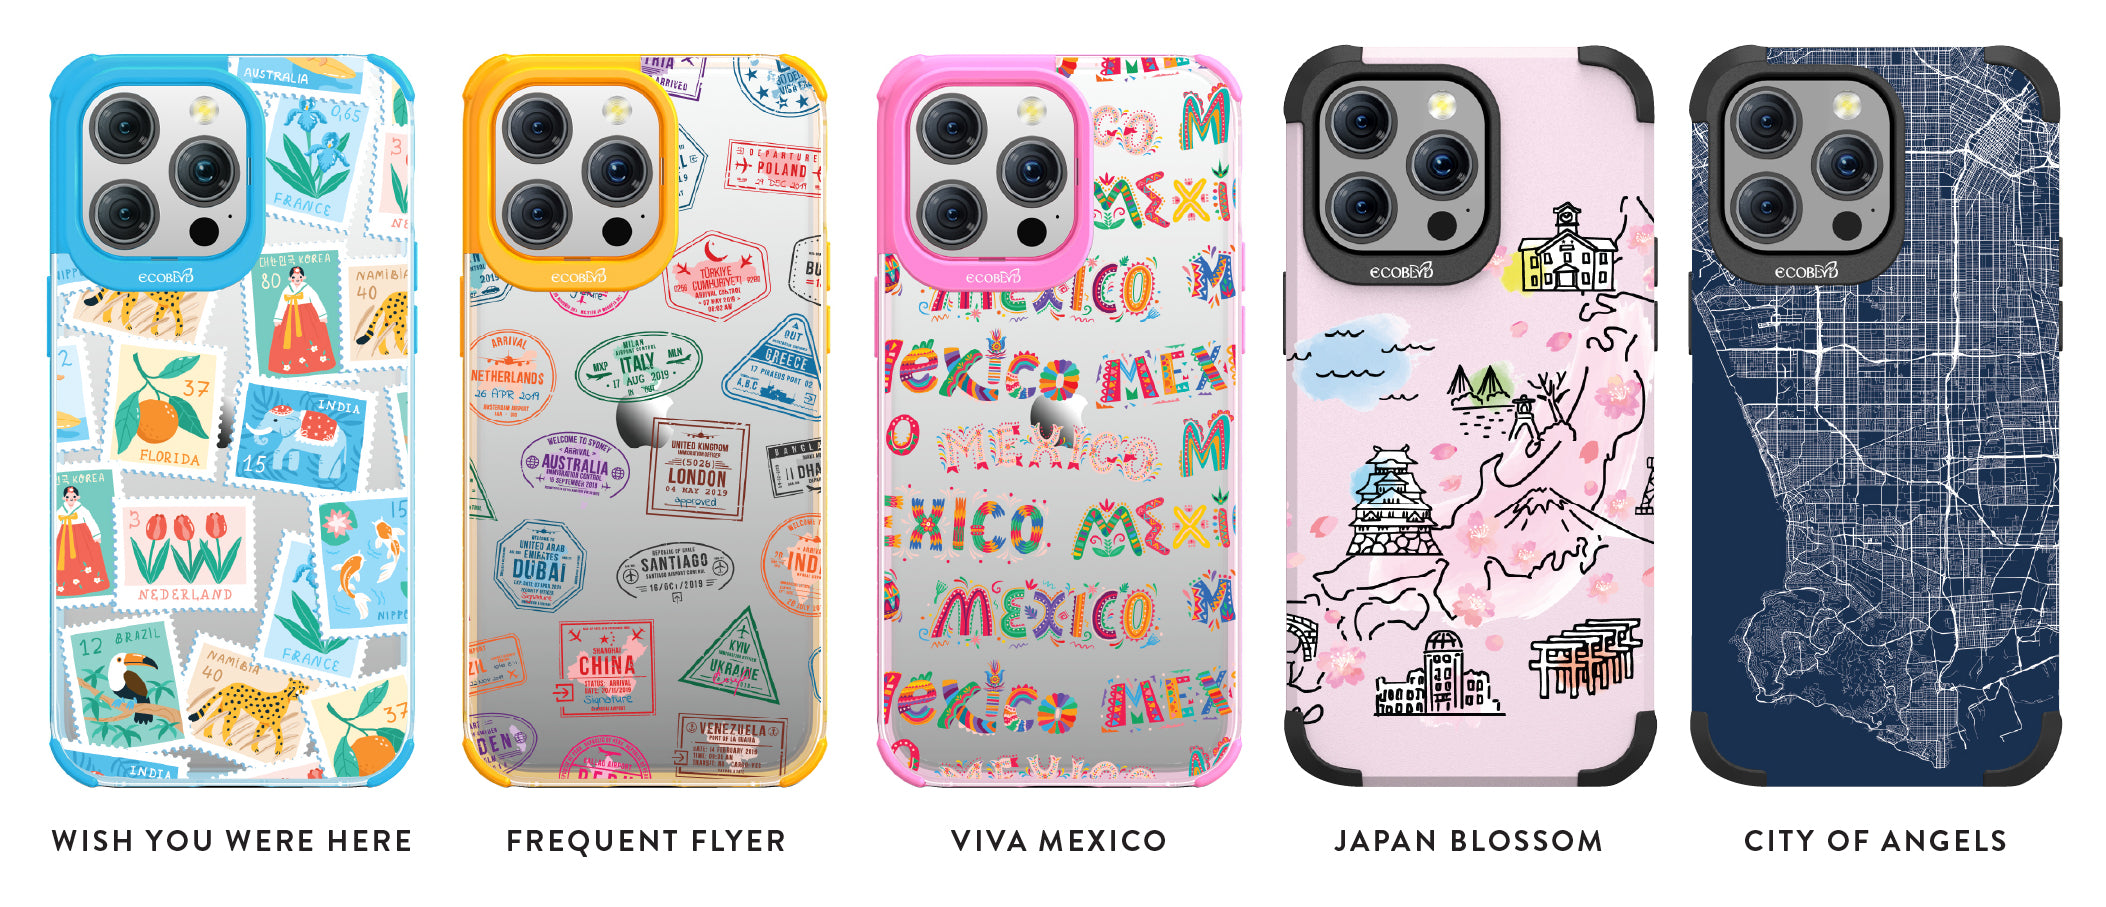 Collect Souvenirs With EcoBlvd's Travel Design Phone Cases